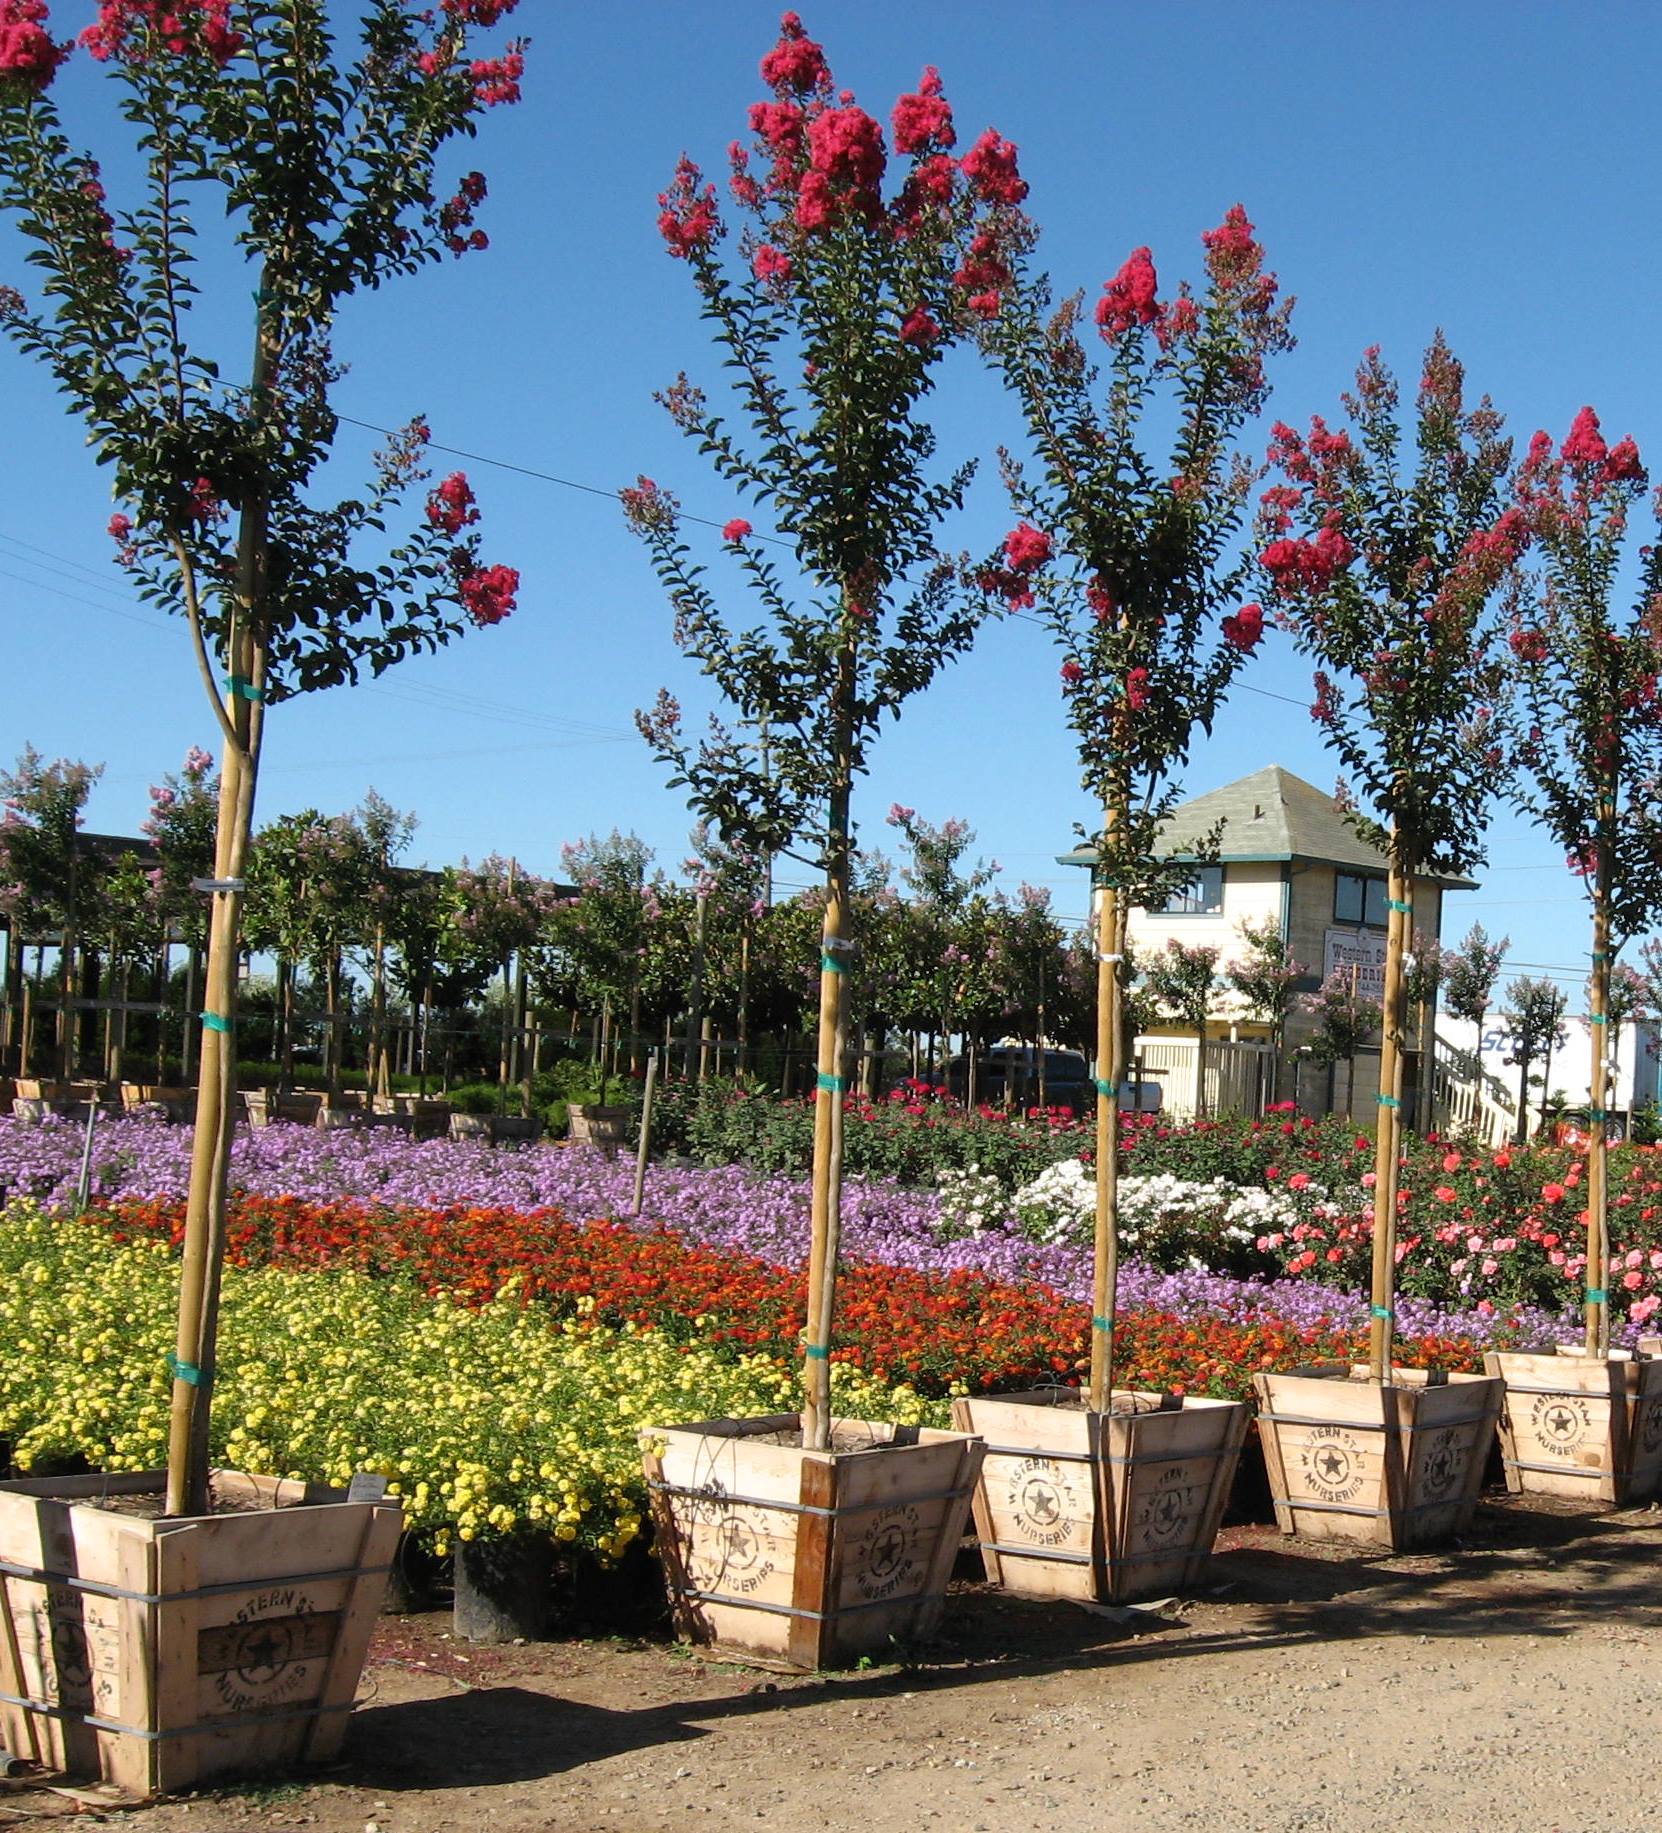 trees and plants in a nursery